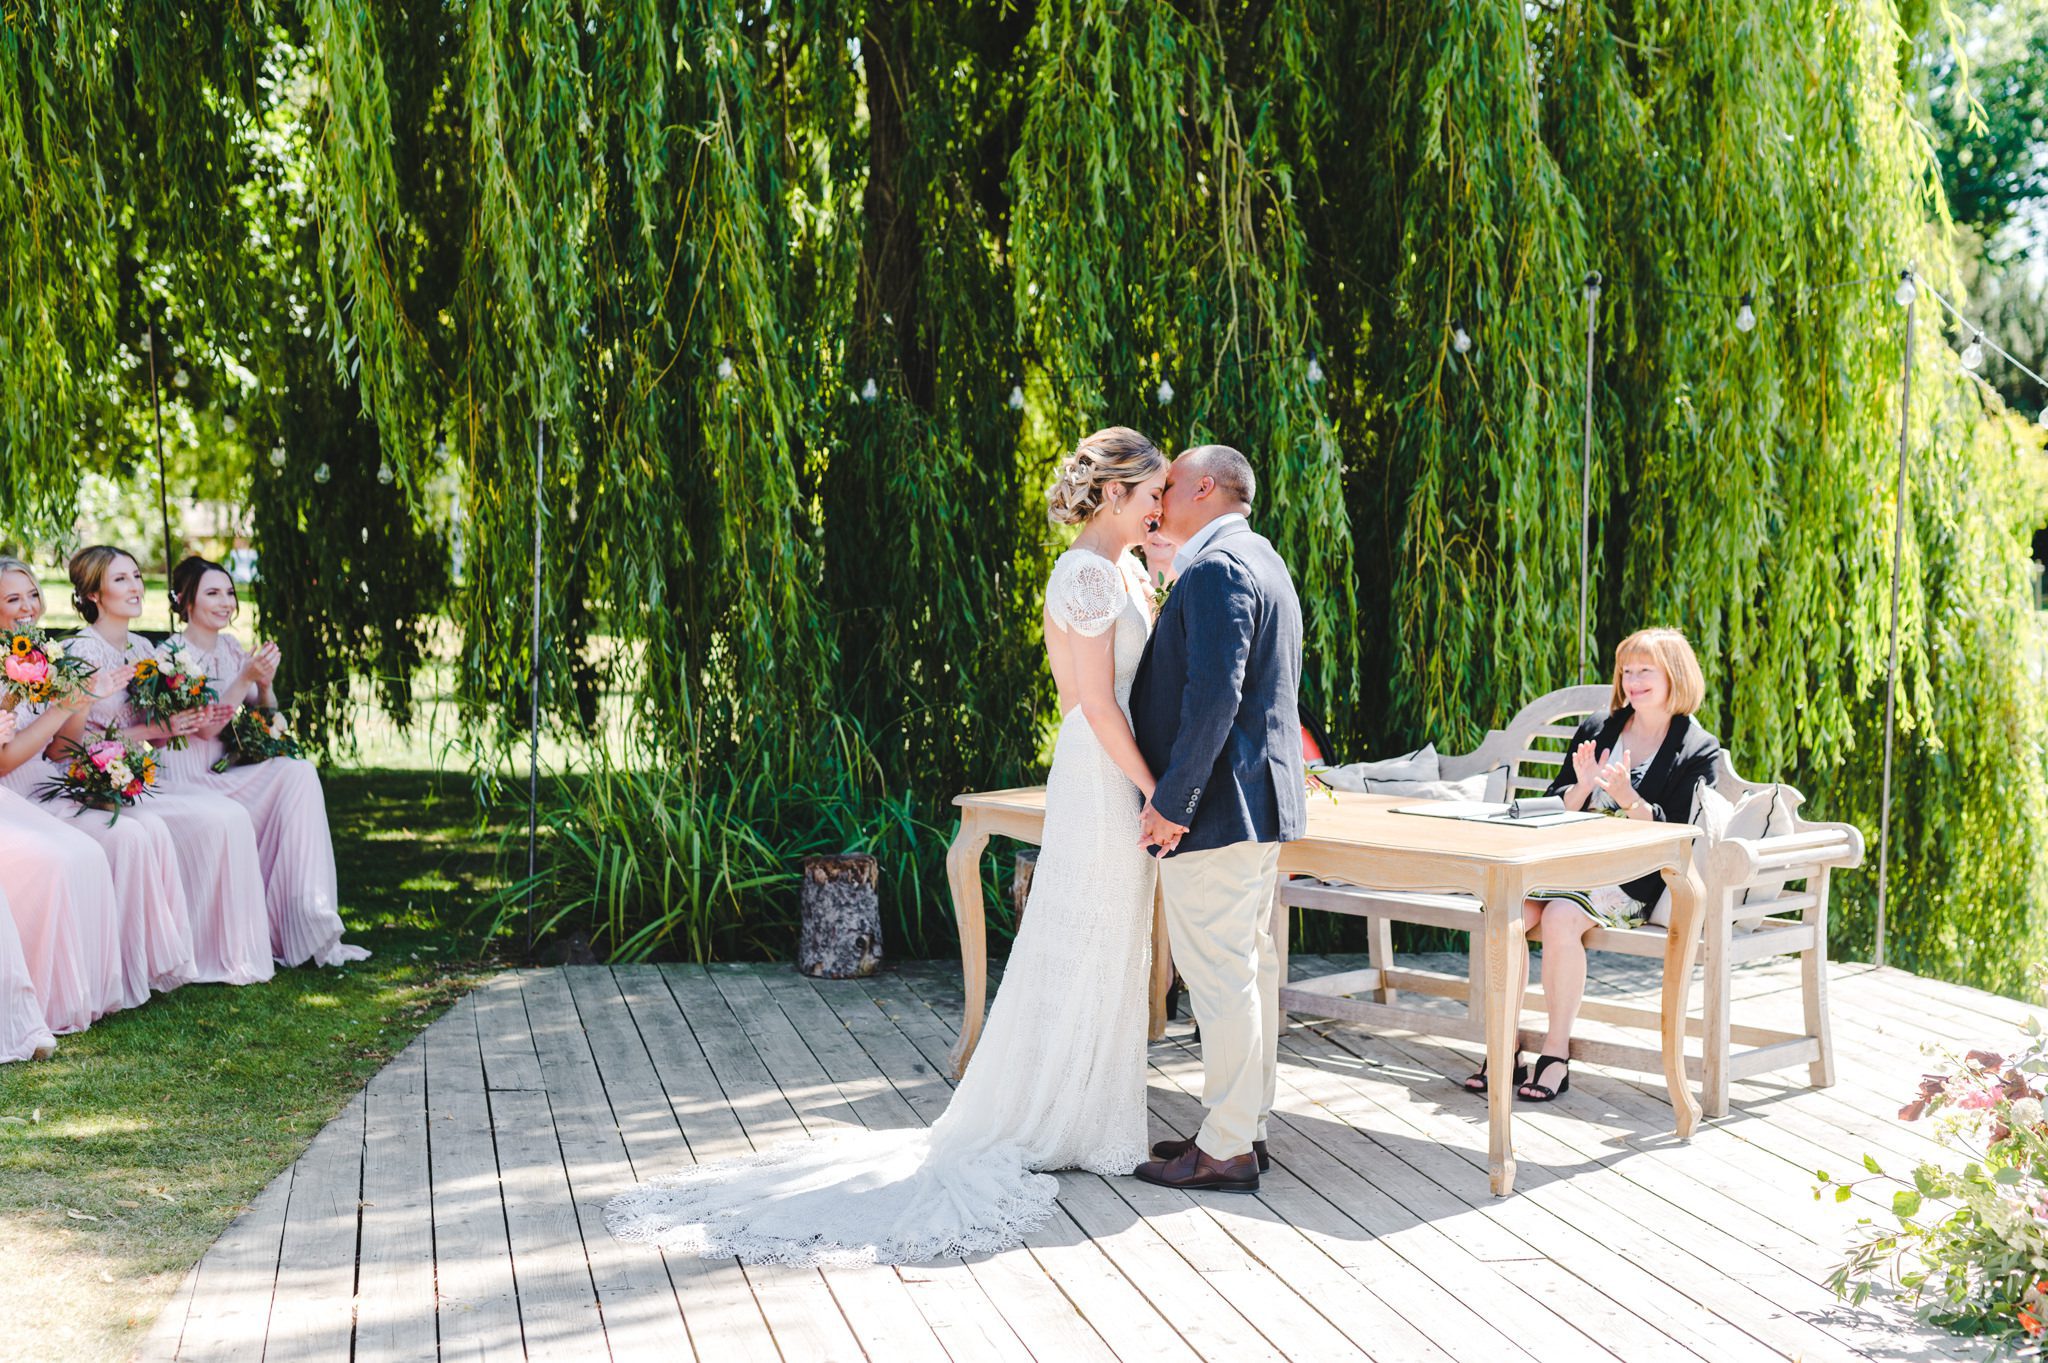 First kiss at a Barns and Yard wedding ceremony